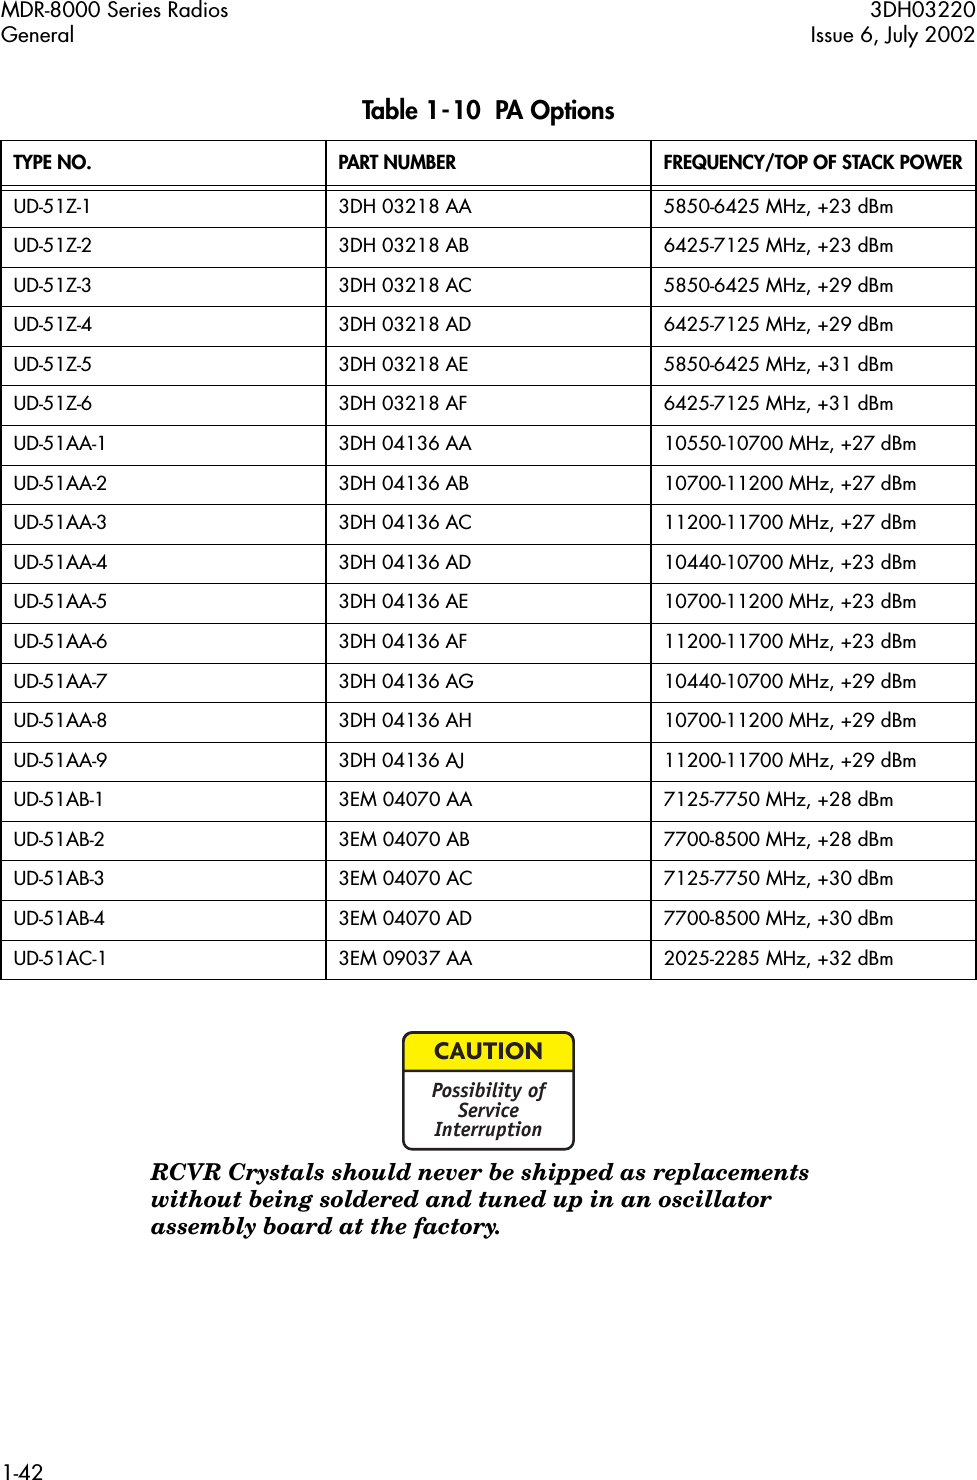 MDR-8000 Series Radios 3DH03220General Issue 6, July 20021-42RCVR Crystals should never be shipped as replacements without being soldered and tuned up in an oscillator assembly board at the factory.Table 1-10  PA OptionsTYPE NO. PART NUMBER FREQUENCY/TOP OF STACK POWERUD-51Z-1 3DH 03218 AA 5850-6425 MHz, +23 dBm UD-51Z-2 3DH 03218 AB 6425-7125 MHz, +23 dBmUD-51Z-3 3DH 03218 AC 5850-6425 MHz, +29 dBmUD-51Z-4 3DH 03218 AD 6425-7125 MHz, +29 dBm UD-51Z-5 3DH 03218 AE 5850-6425 MHz, +31 dBmUD-51Z-6 3DH 03218 AF 6425-7125 MHz, +31 dBm UD-51AA-1 3DH 04136 AA 10550-10700 MHz, +27 dBmUD-51AA-2 3DH 04136 AB 10700-11200 MHz, +27 dBmUD-51AA-3 3DH 04136 AC 11200-11700 MHz, +27 dBmUD-51AA-4 3DH 04136 AD 10440-10700 MHz, +23 dBmUD-51AA-5 3DH 04136 AE 10700-11200 MHz, +23 dBmUD-51AA-6 3DH 04136 AF 11200-11700 MHz, +23 dBmUD-51AA-7 3DH 04136 AG 10440-10700 MHz, +29 dBmUD-51AA-8 3DH 04136 AH 10700-11200 MHz, +29 dBmUD-51AA-9 3DH 04136 AJ 11200-11700 MHz, +29 dBmUD-51AB-1 3EM 04070 AA 7125-7750 MHz, +28 dBmUD-51AB-2 3EM 04070 AB 7700-8500 MHz, +28 dBmUD-51AB-3 3EM 04070 AC 7125-7750 MHz, +30 dBmUD-51AB-4 3EM 04070 AD 7700-8500 MHz, +30 dBmUD-51AC-1 3EM 09037 AA 2025-2285 MHz, +32 dBmCAUTIONPossibility ofServiceInterruption